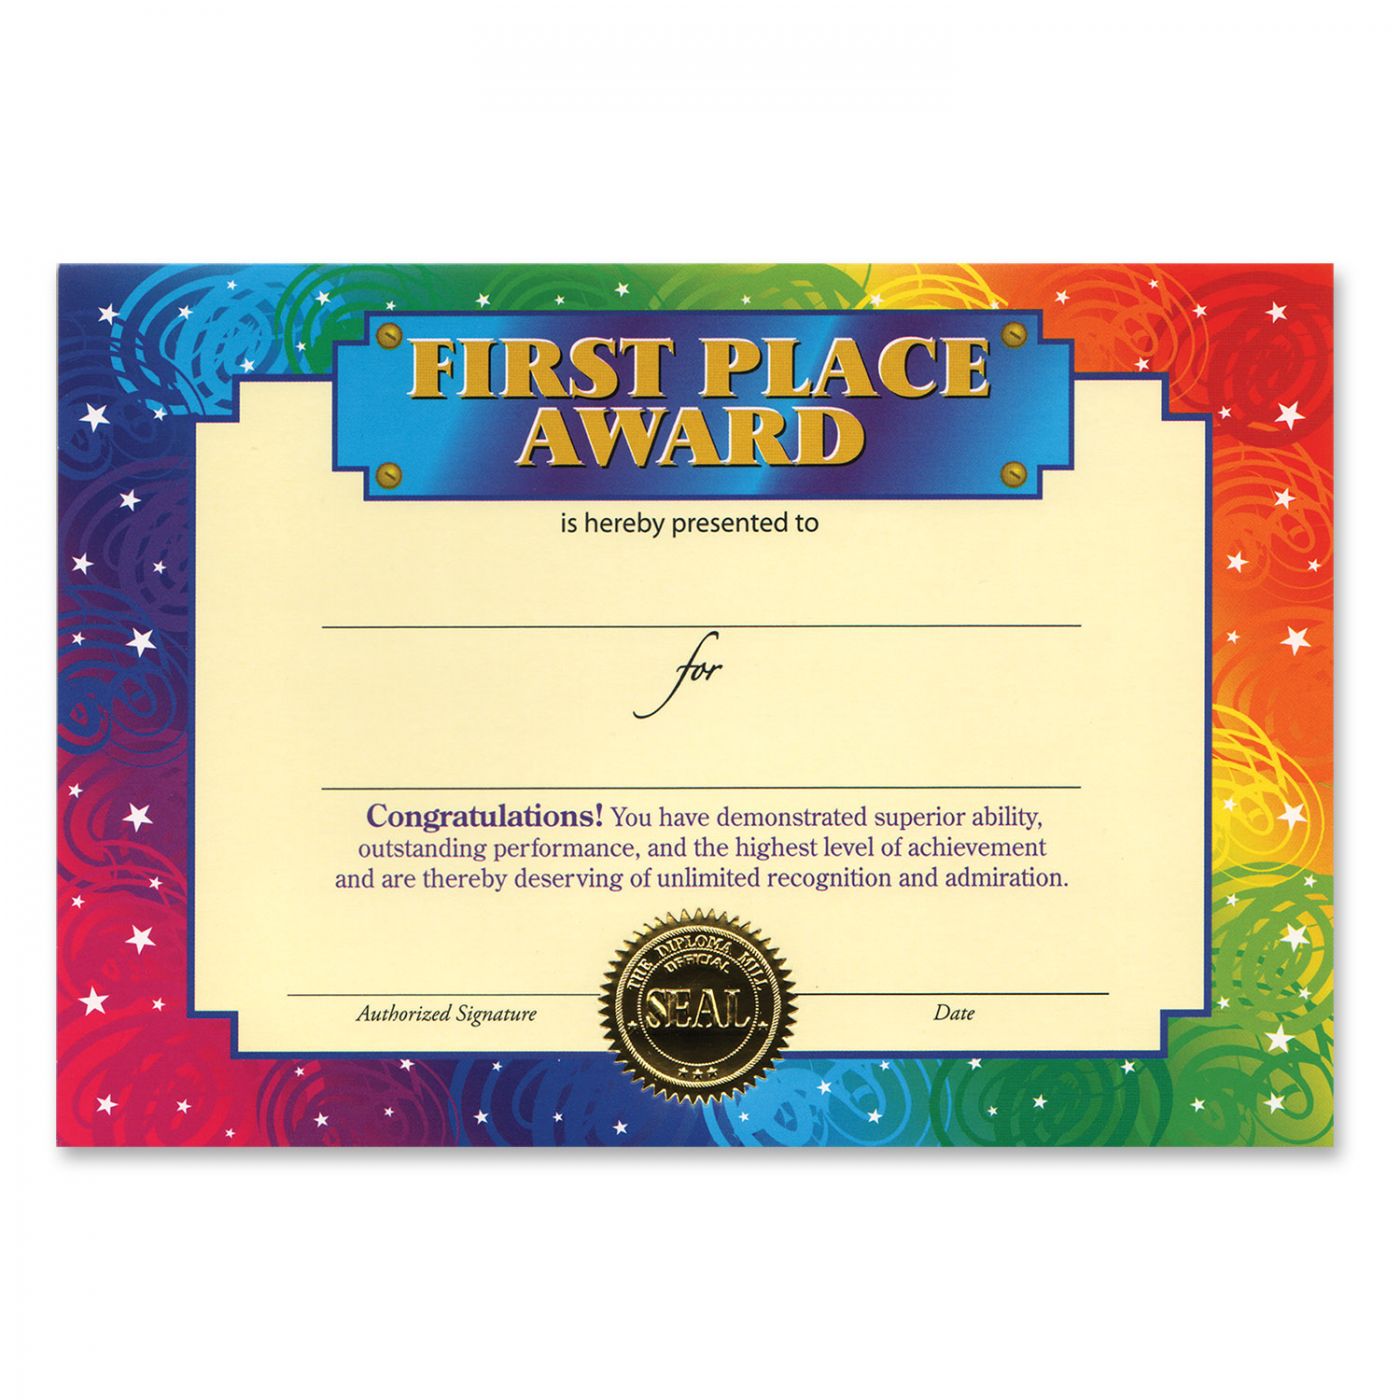 First Place Award Certificate (6) image